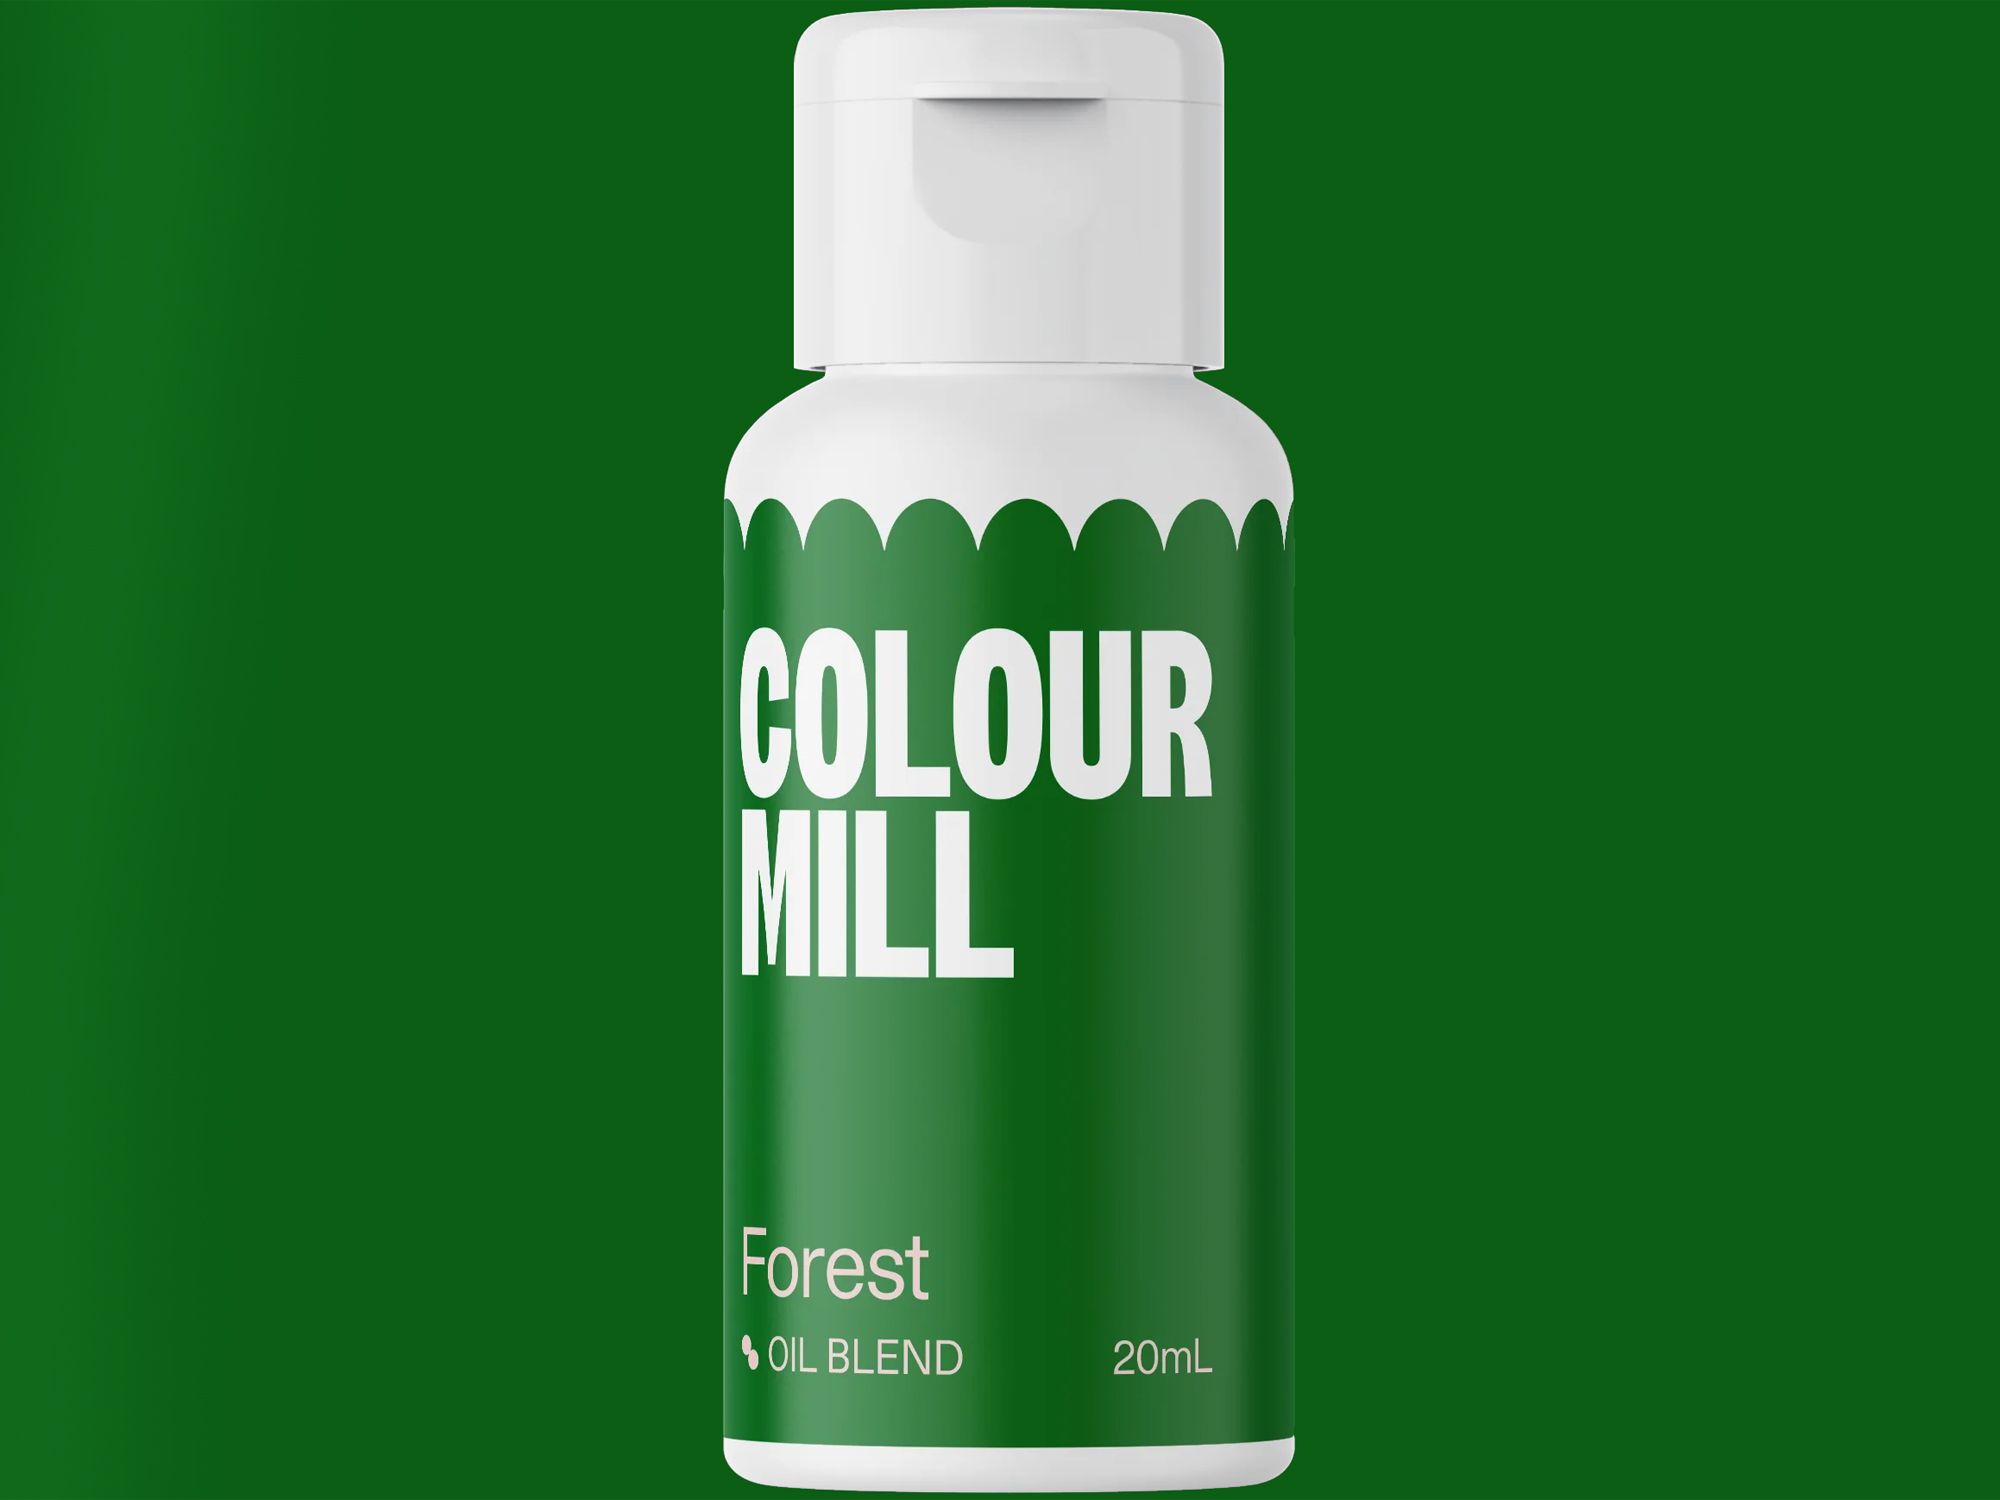 Colour Mill Forest (Oil Blend) 20ml